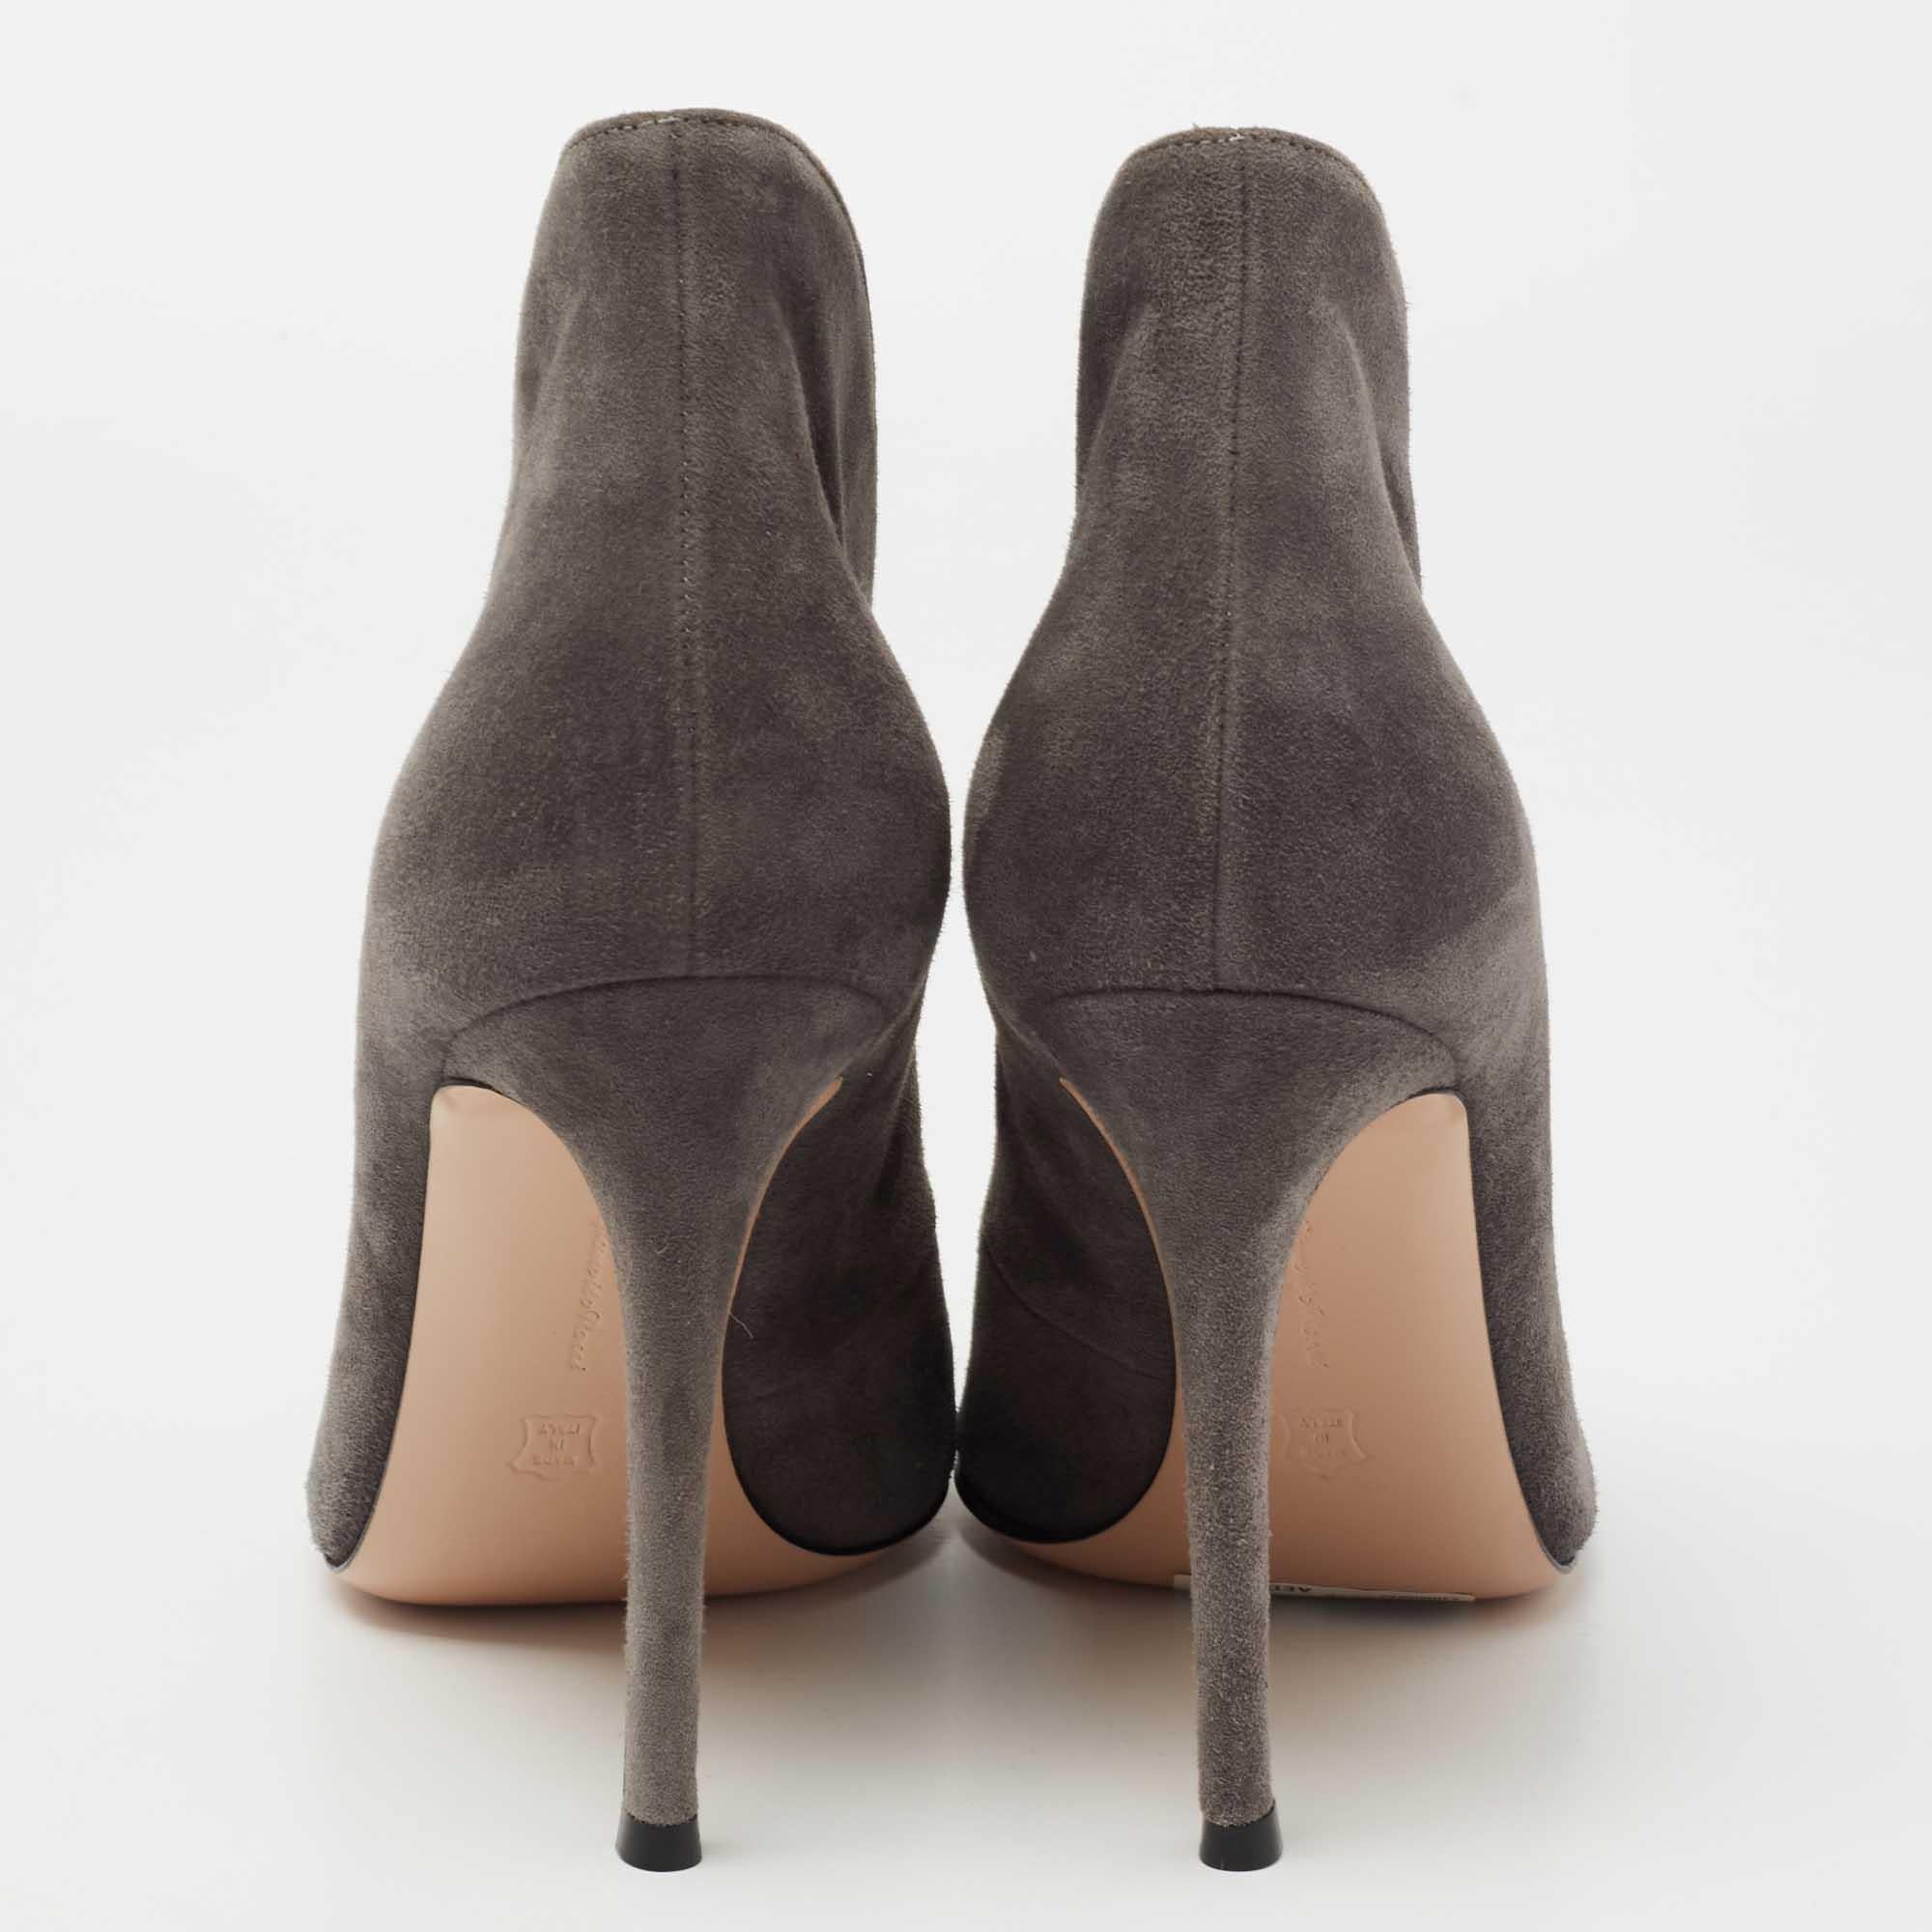 The artistic cut on the upper of these Gianvito Rossi booties will lend you a peek of your feet. Created from suede, they are cut into a peep-toe silhouette with 11 cm heels and a slip-on fitting.

